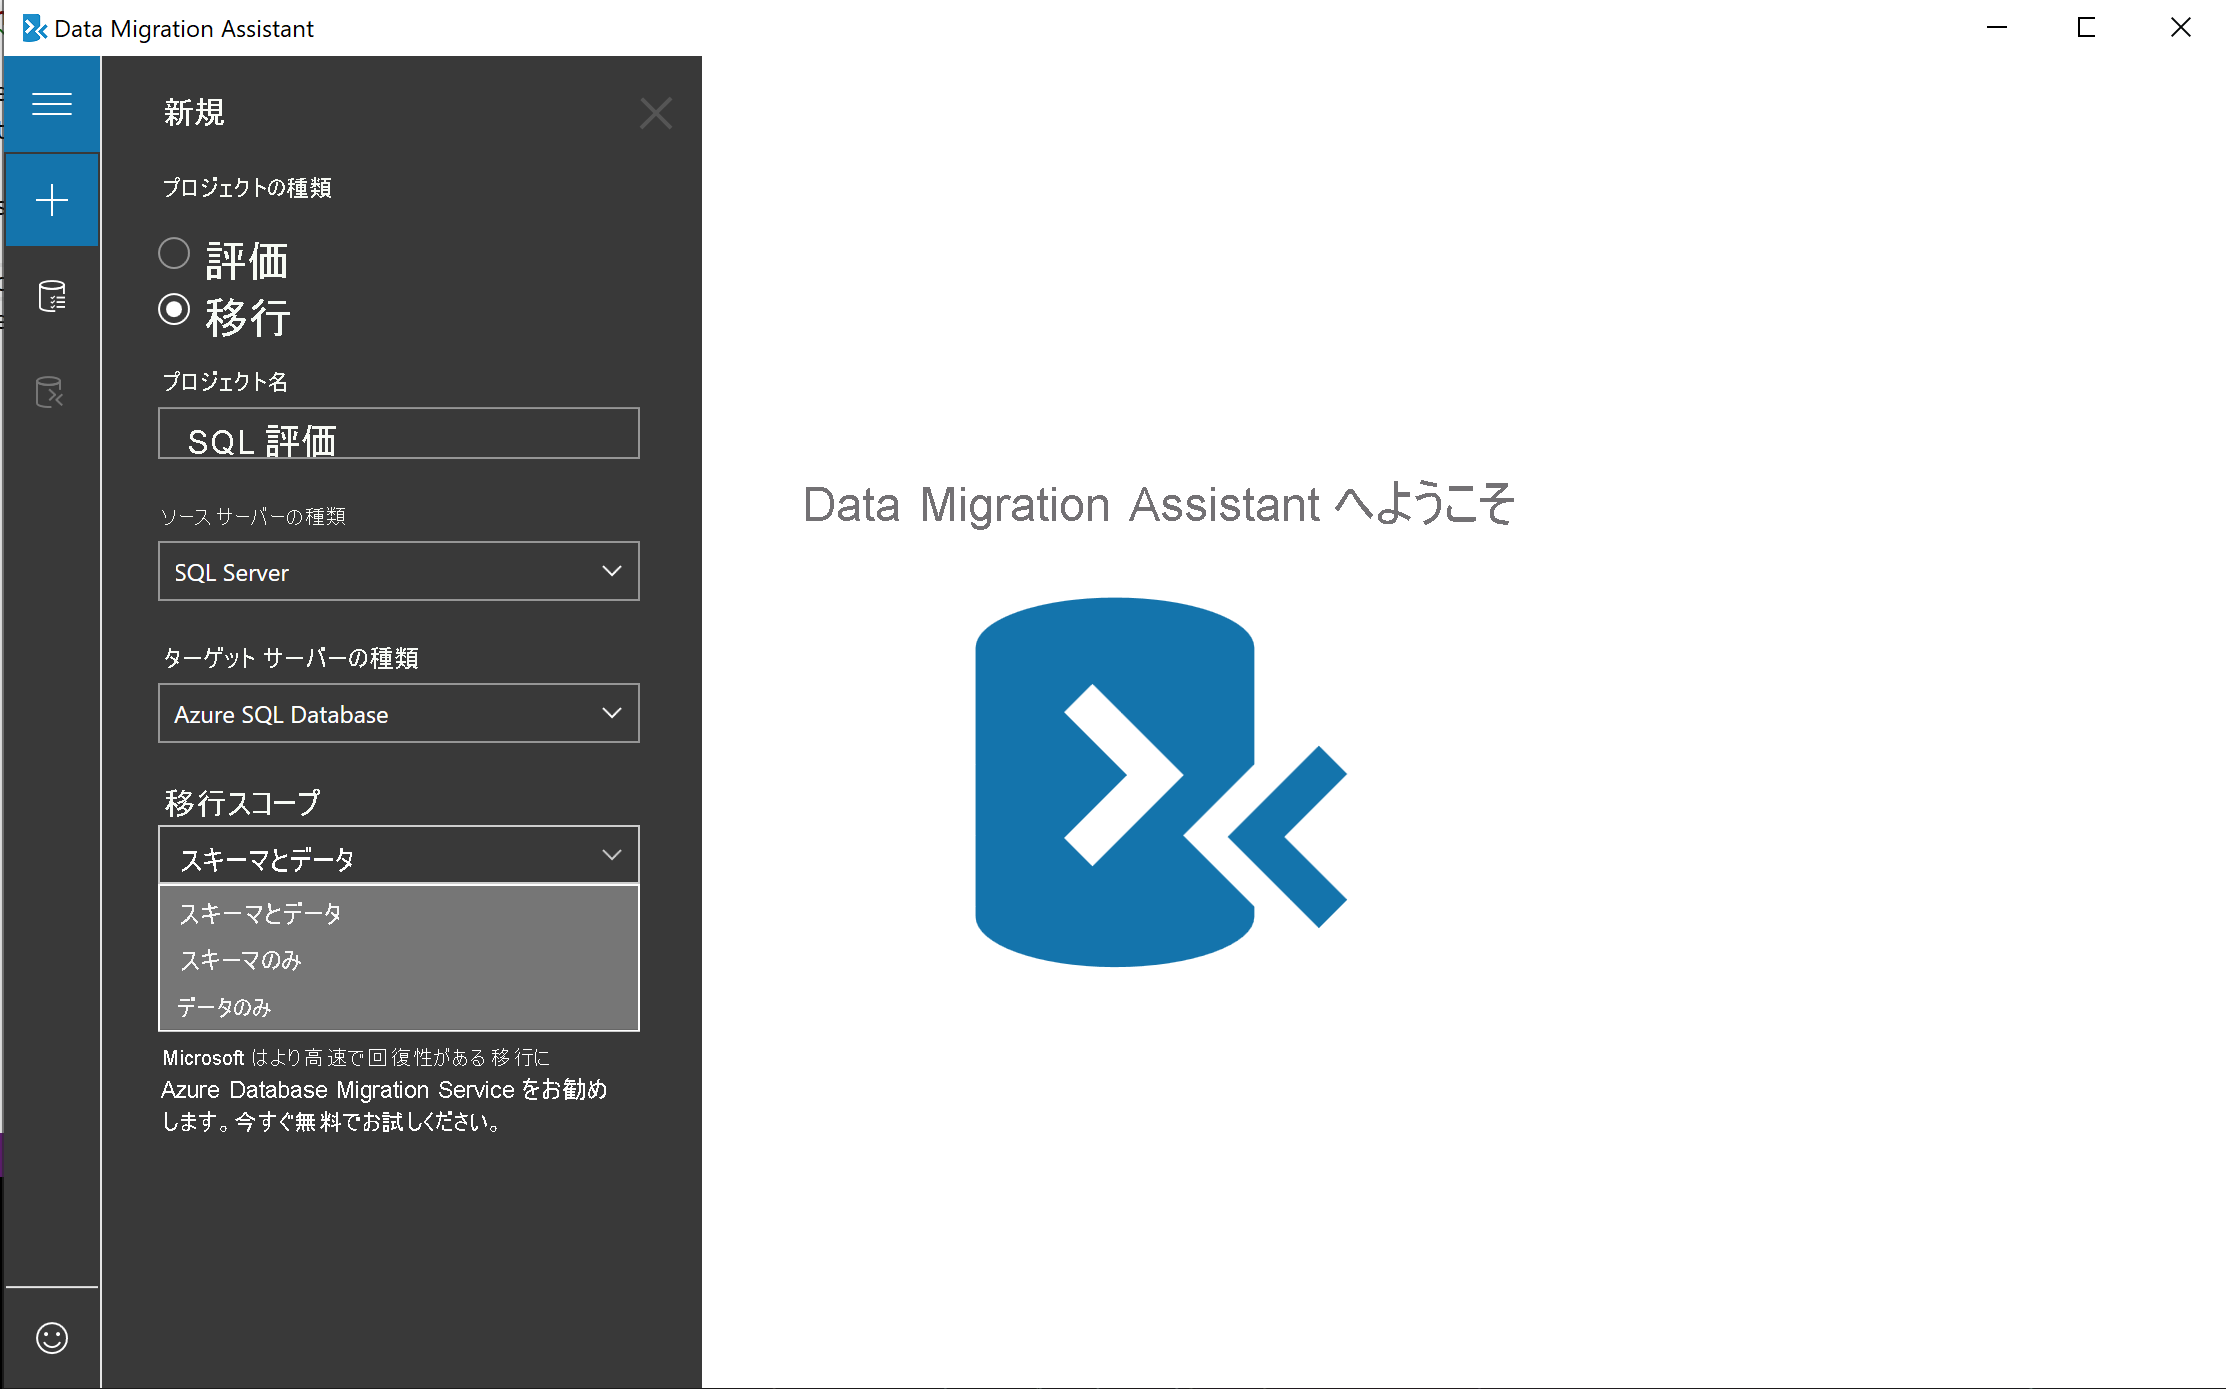 Migration options in the Data Migration Assistant